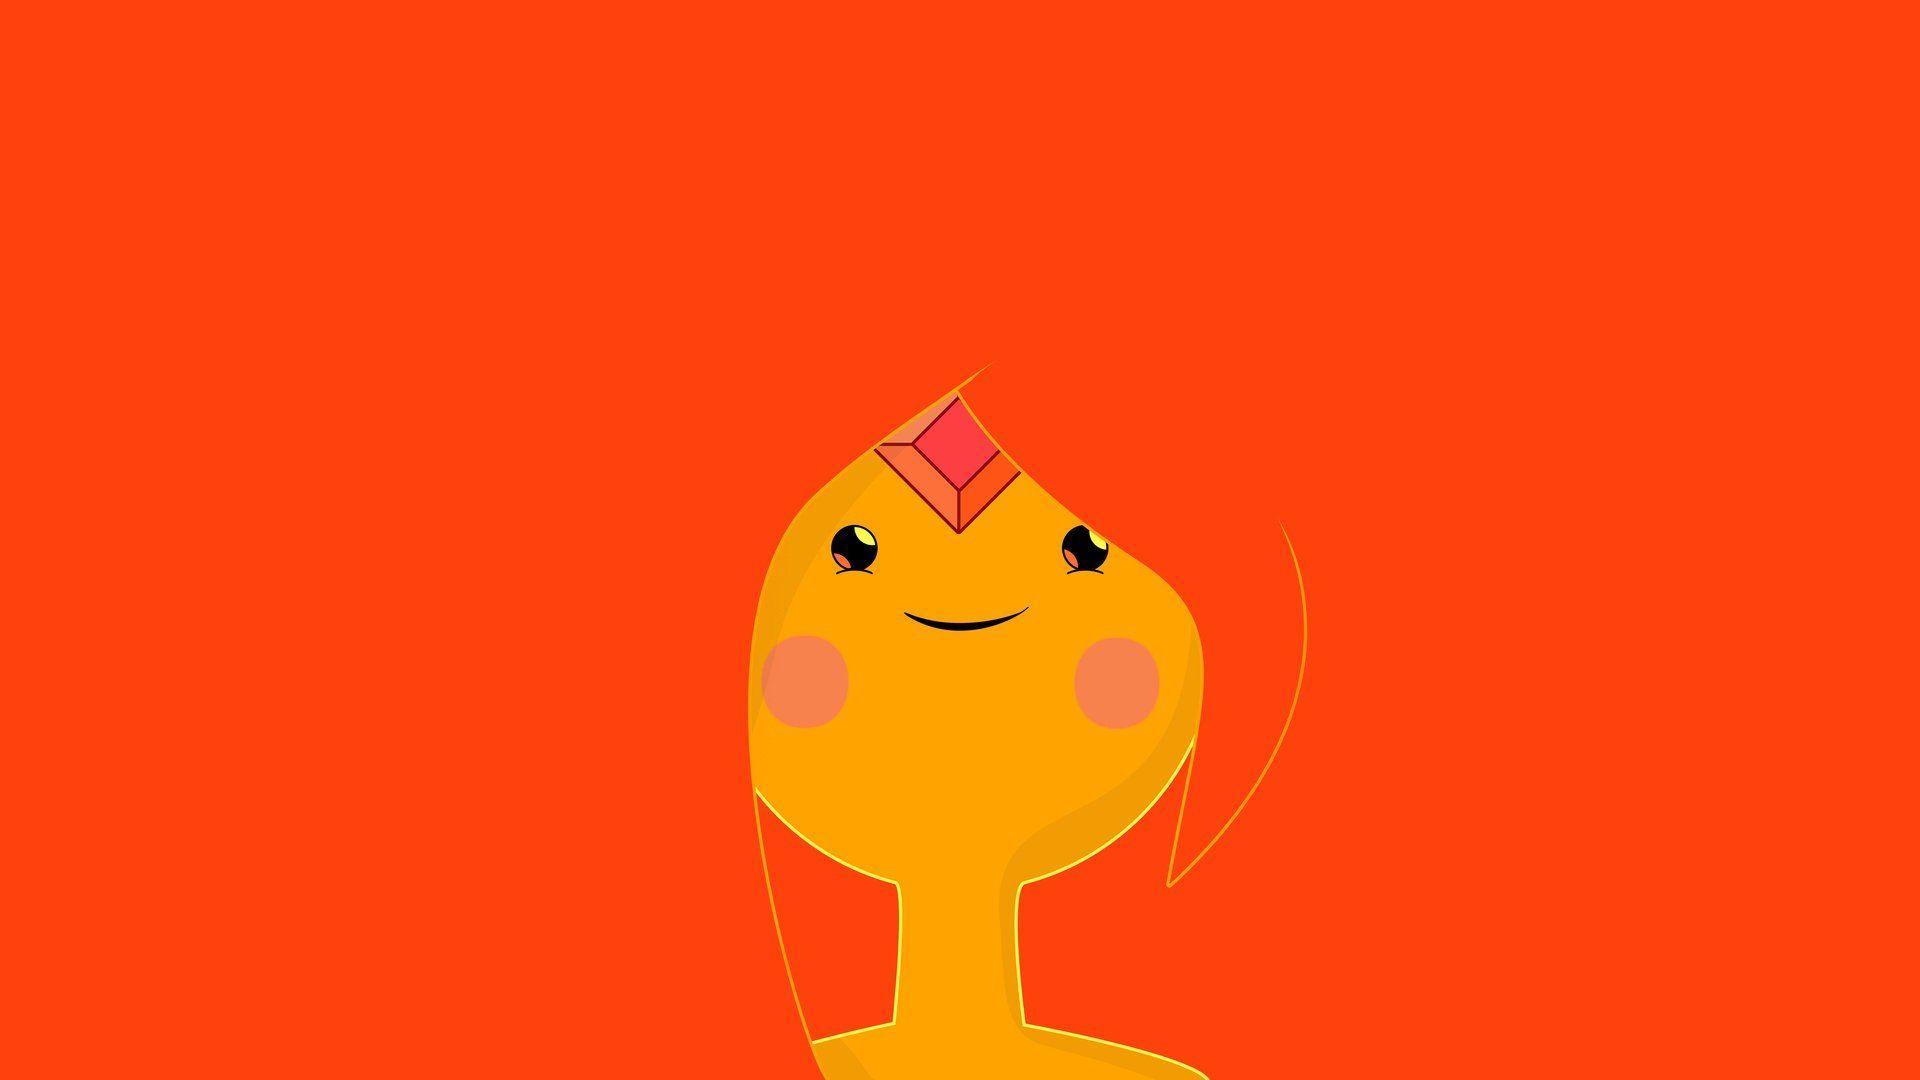 Download Adventure Time Flame Princess Wallpaper Gallery. Best